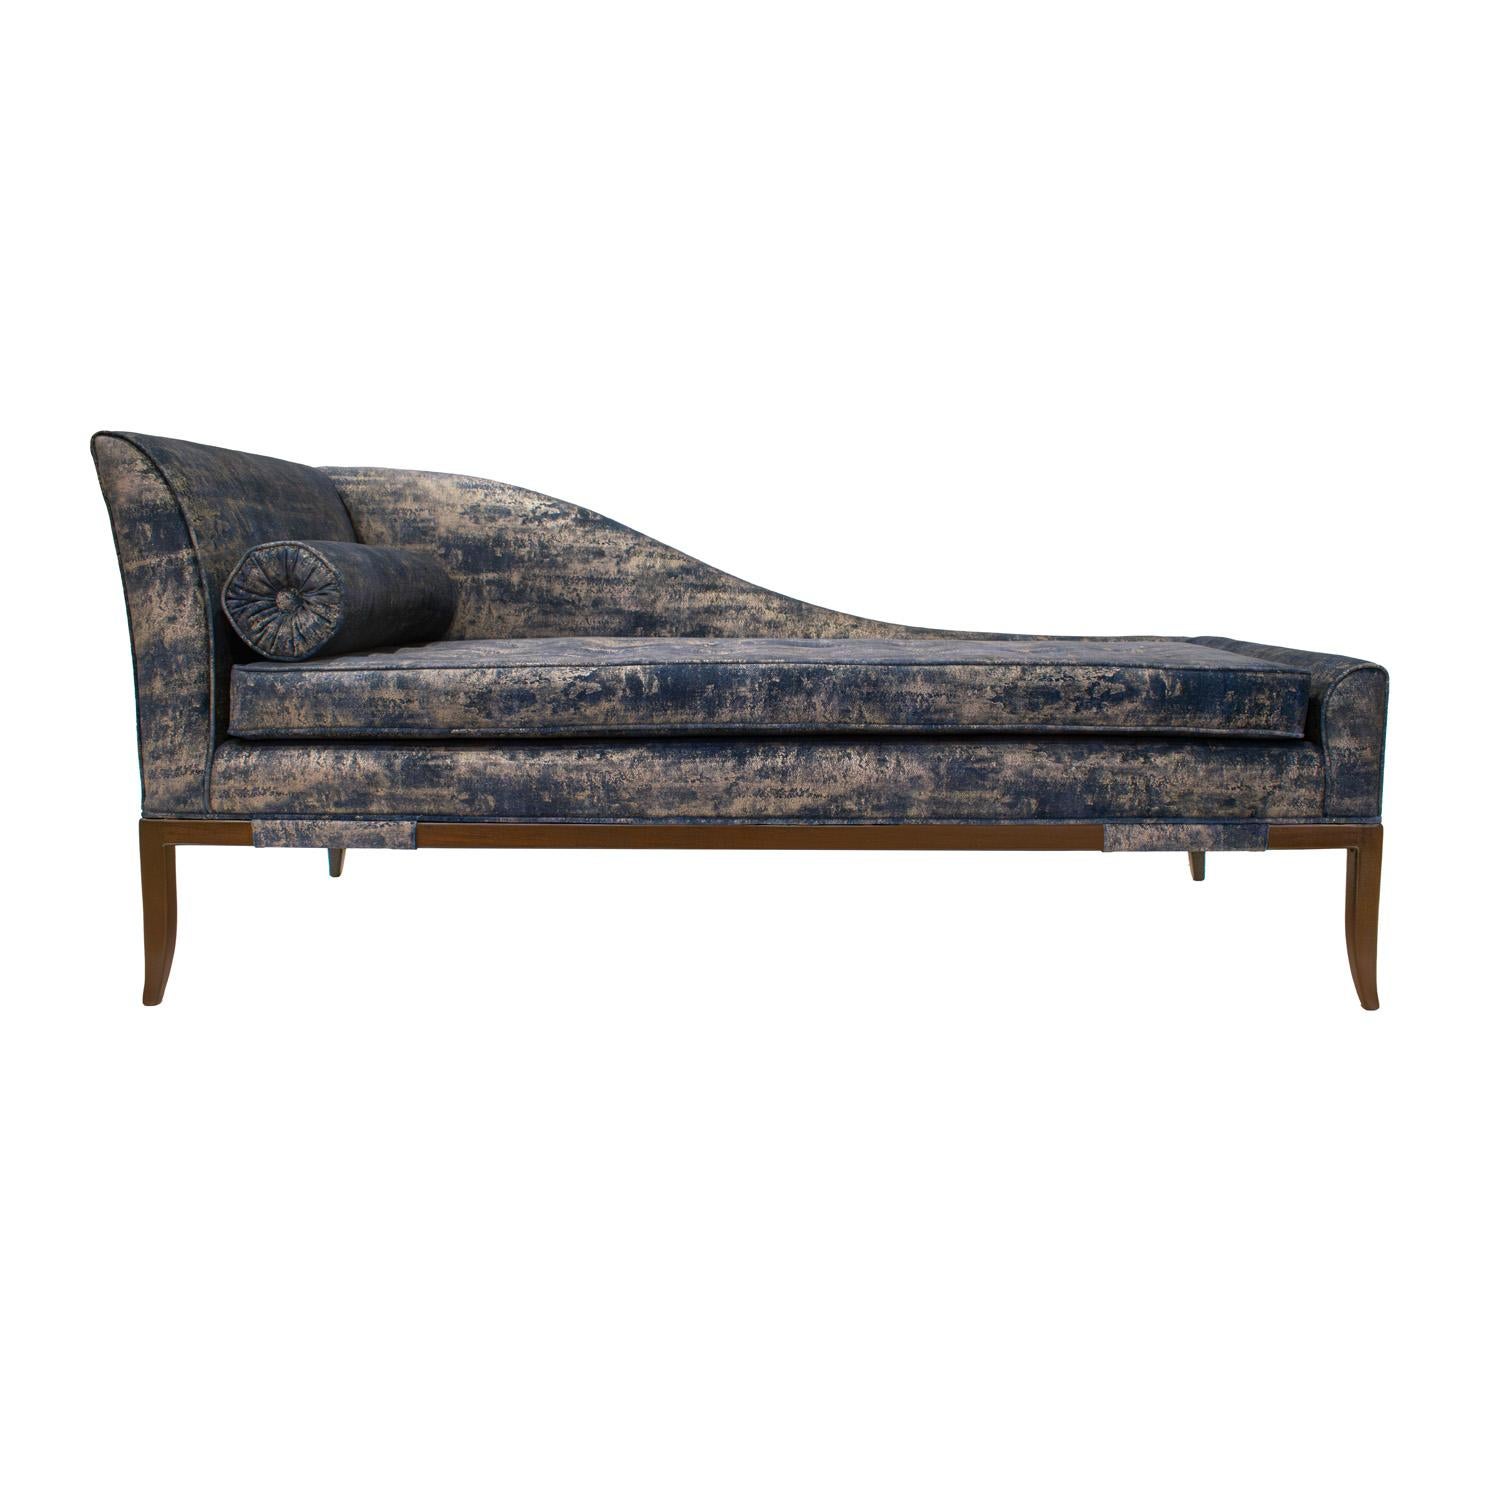 Elegant sloped back chaise model 201 with bolster and wrapped mahogany base by Tommi Parzinger for Parzinger Originals, American 1950’s.  This iconic Parzinger chaise is super chic.  Base refinished and newly reupholstered in a stunning blue and